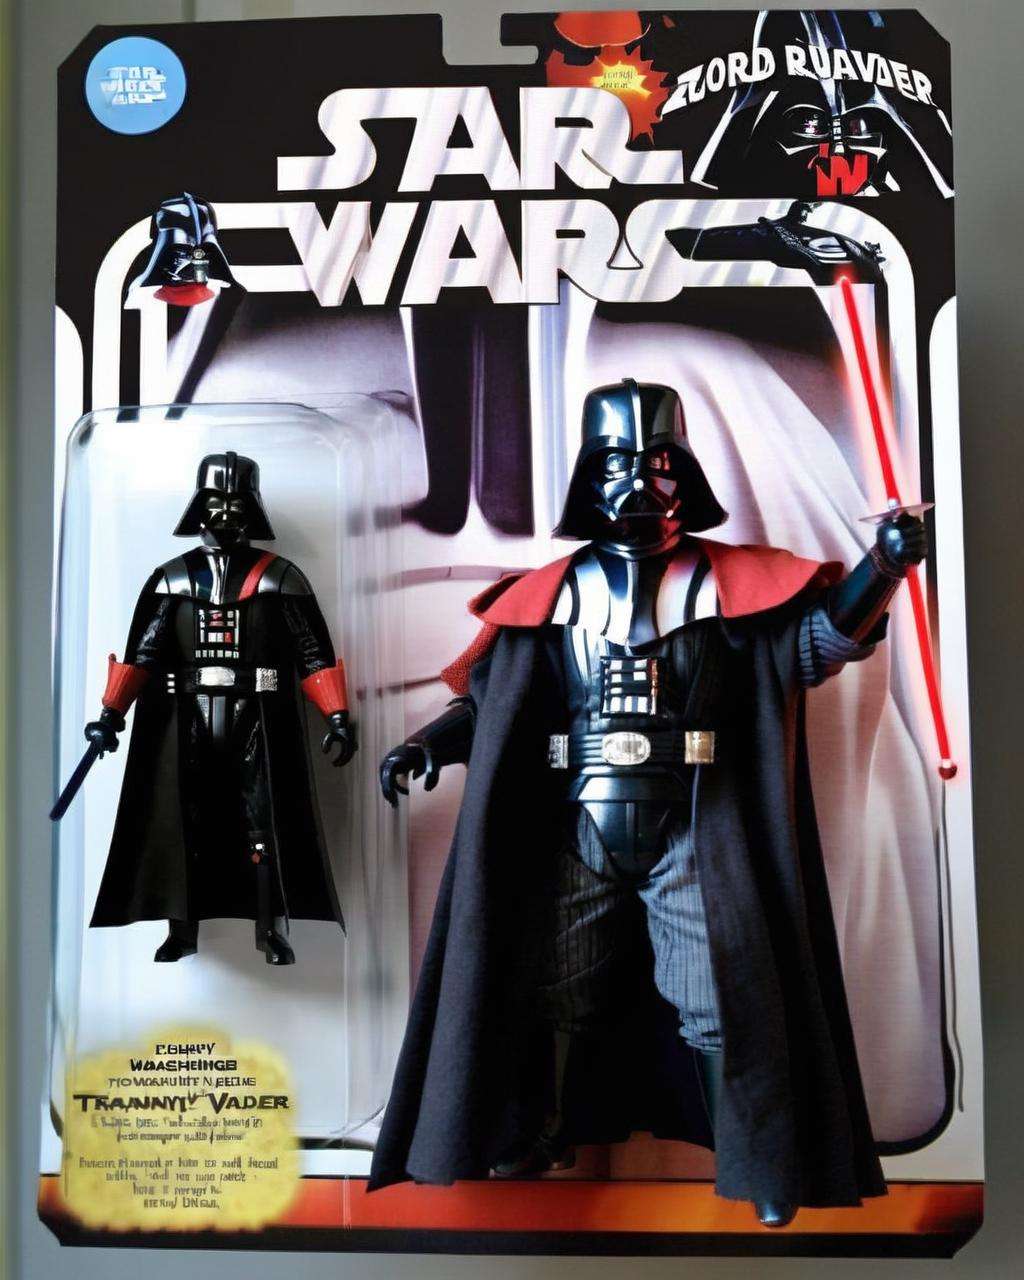 ZorroVader: Mixing Zorro and Darth Vader, this figure is a swashbuckling Sith Lord with a penchant for dueling:0.5 and tyranny:0.5. <lora:Awe_Toys:1.0>